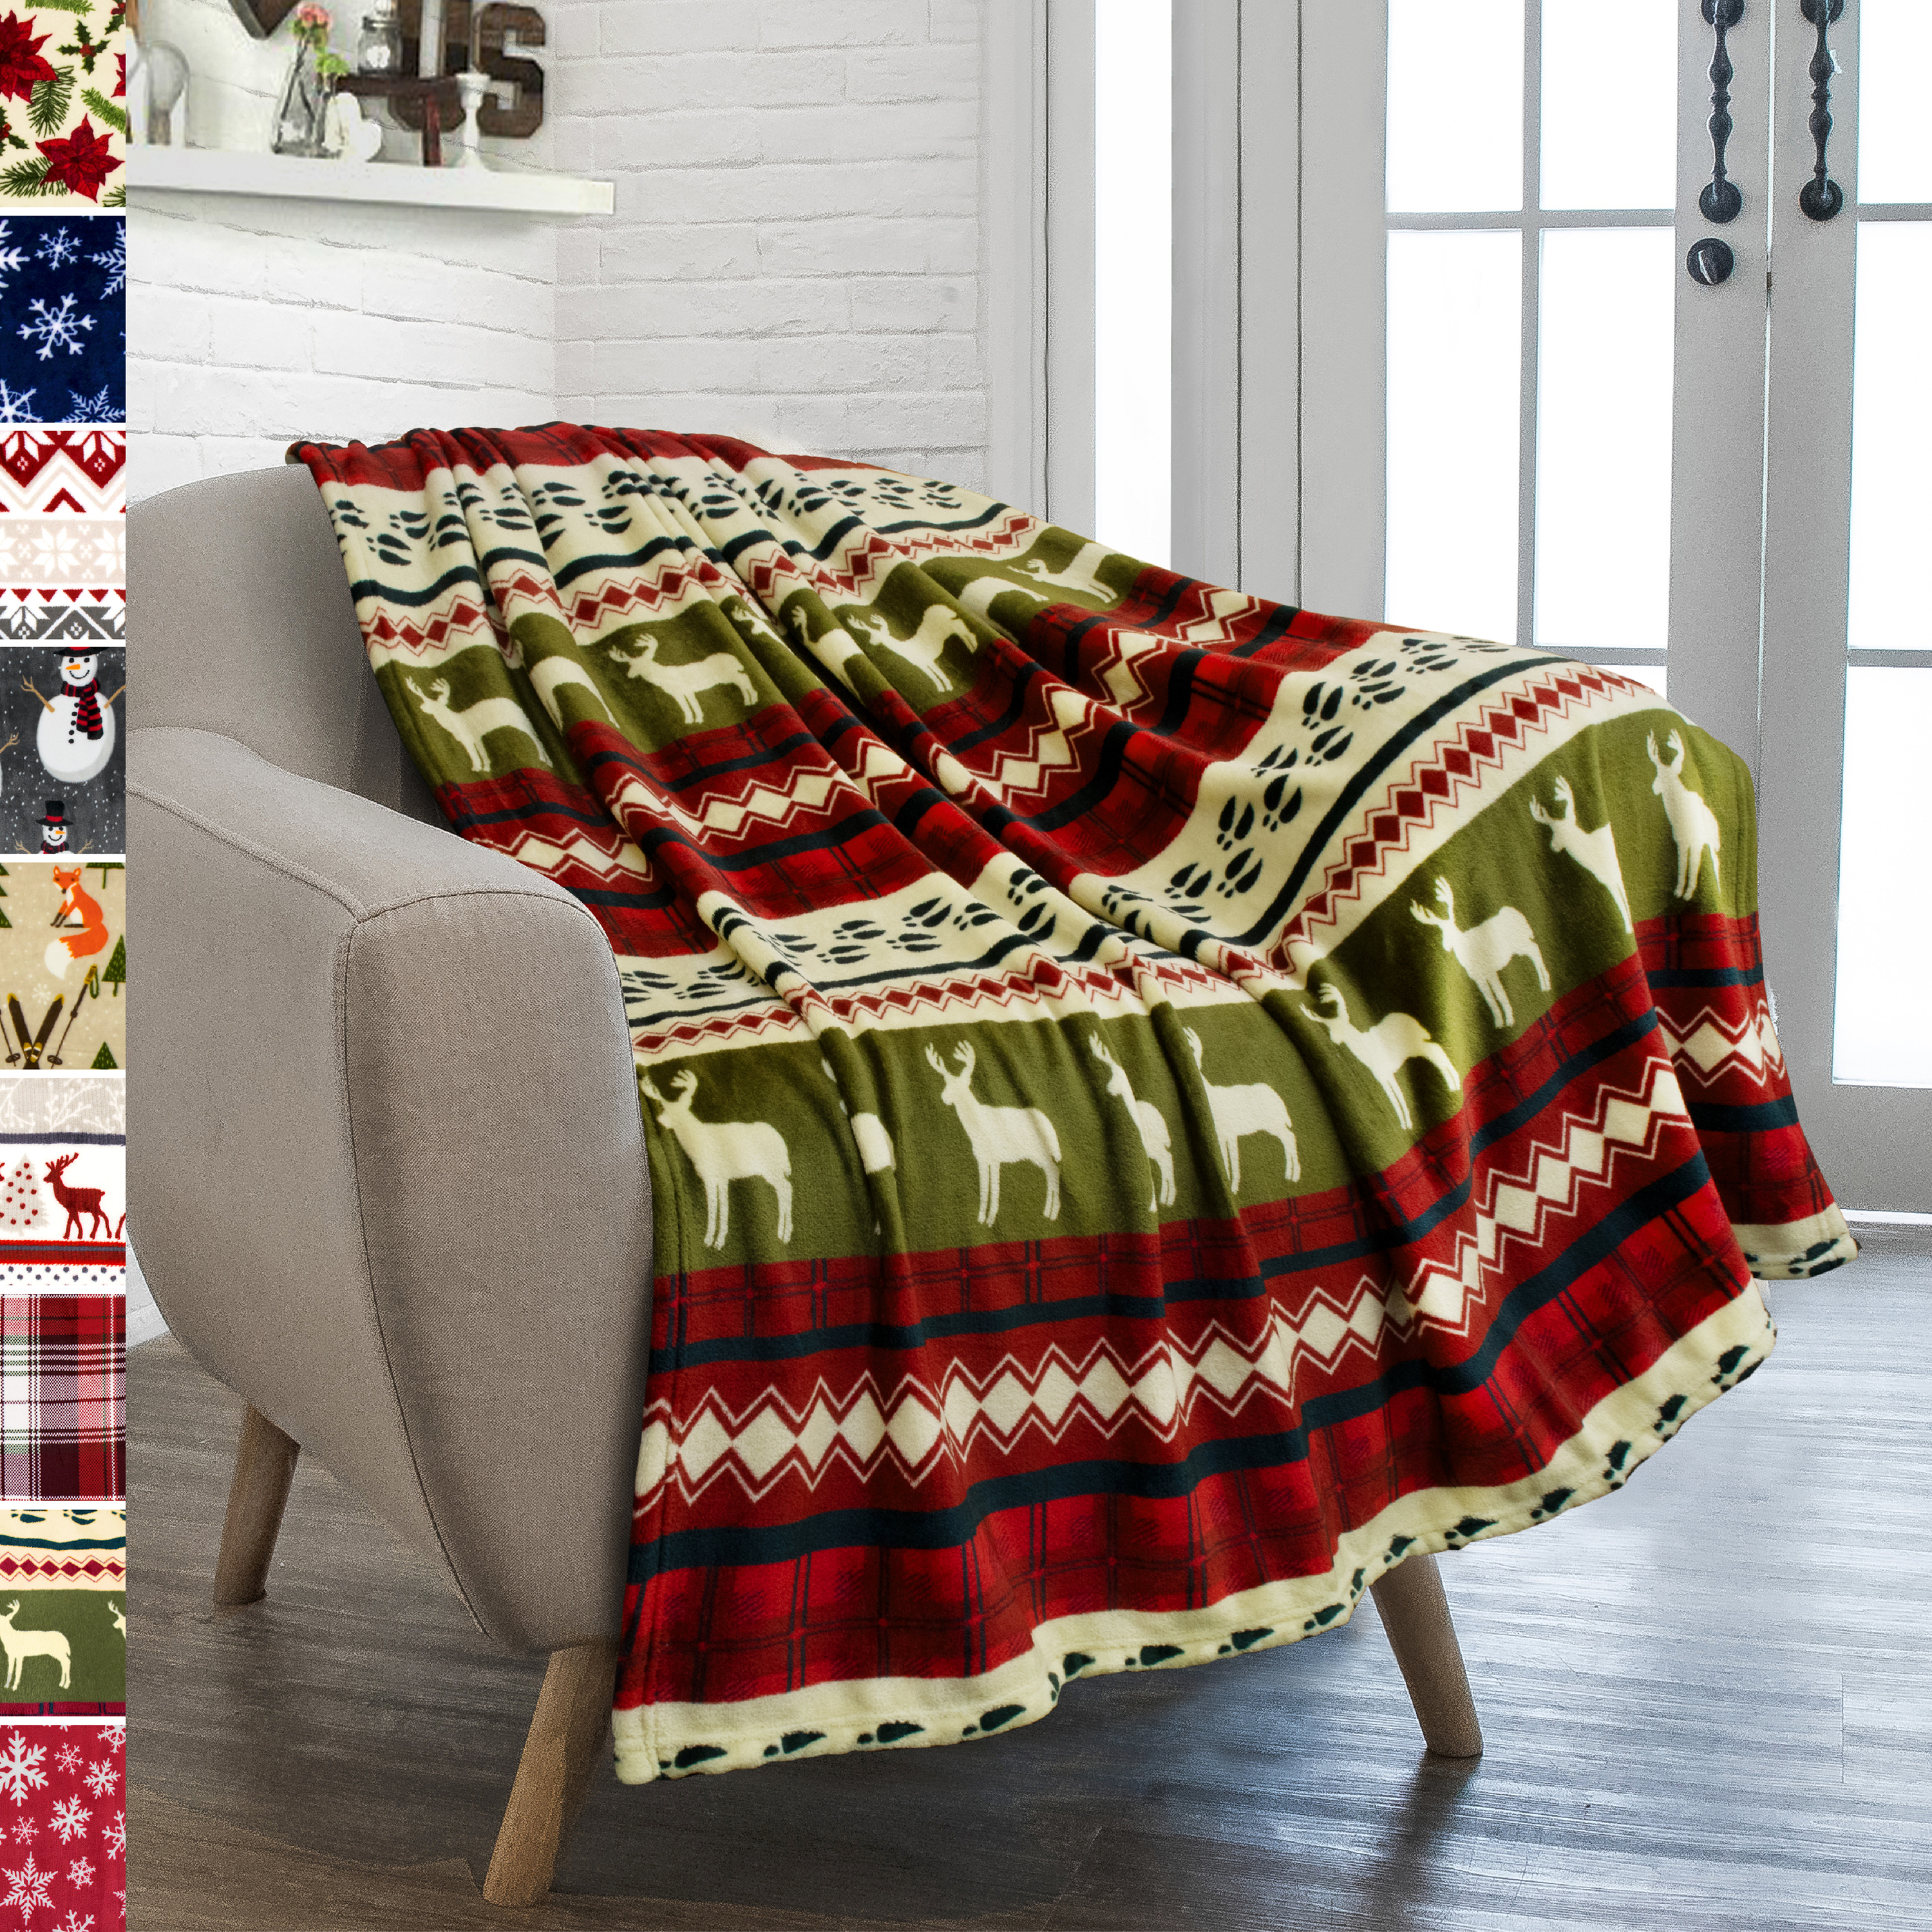 Soft Plush Winter Christmas Holiday Throw Blanket Great Gift !!! 50" X 60" 